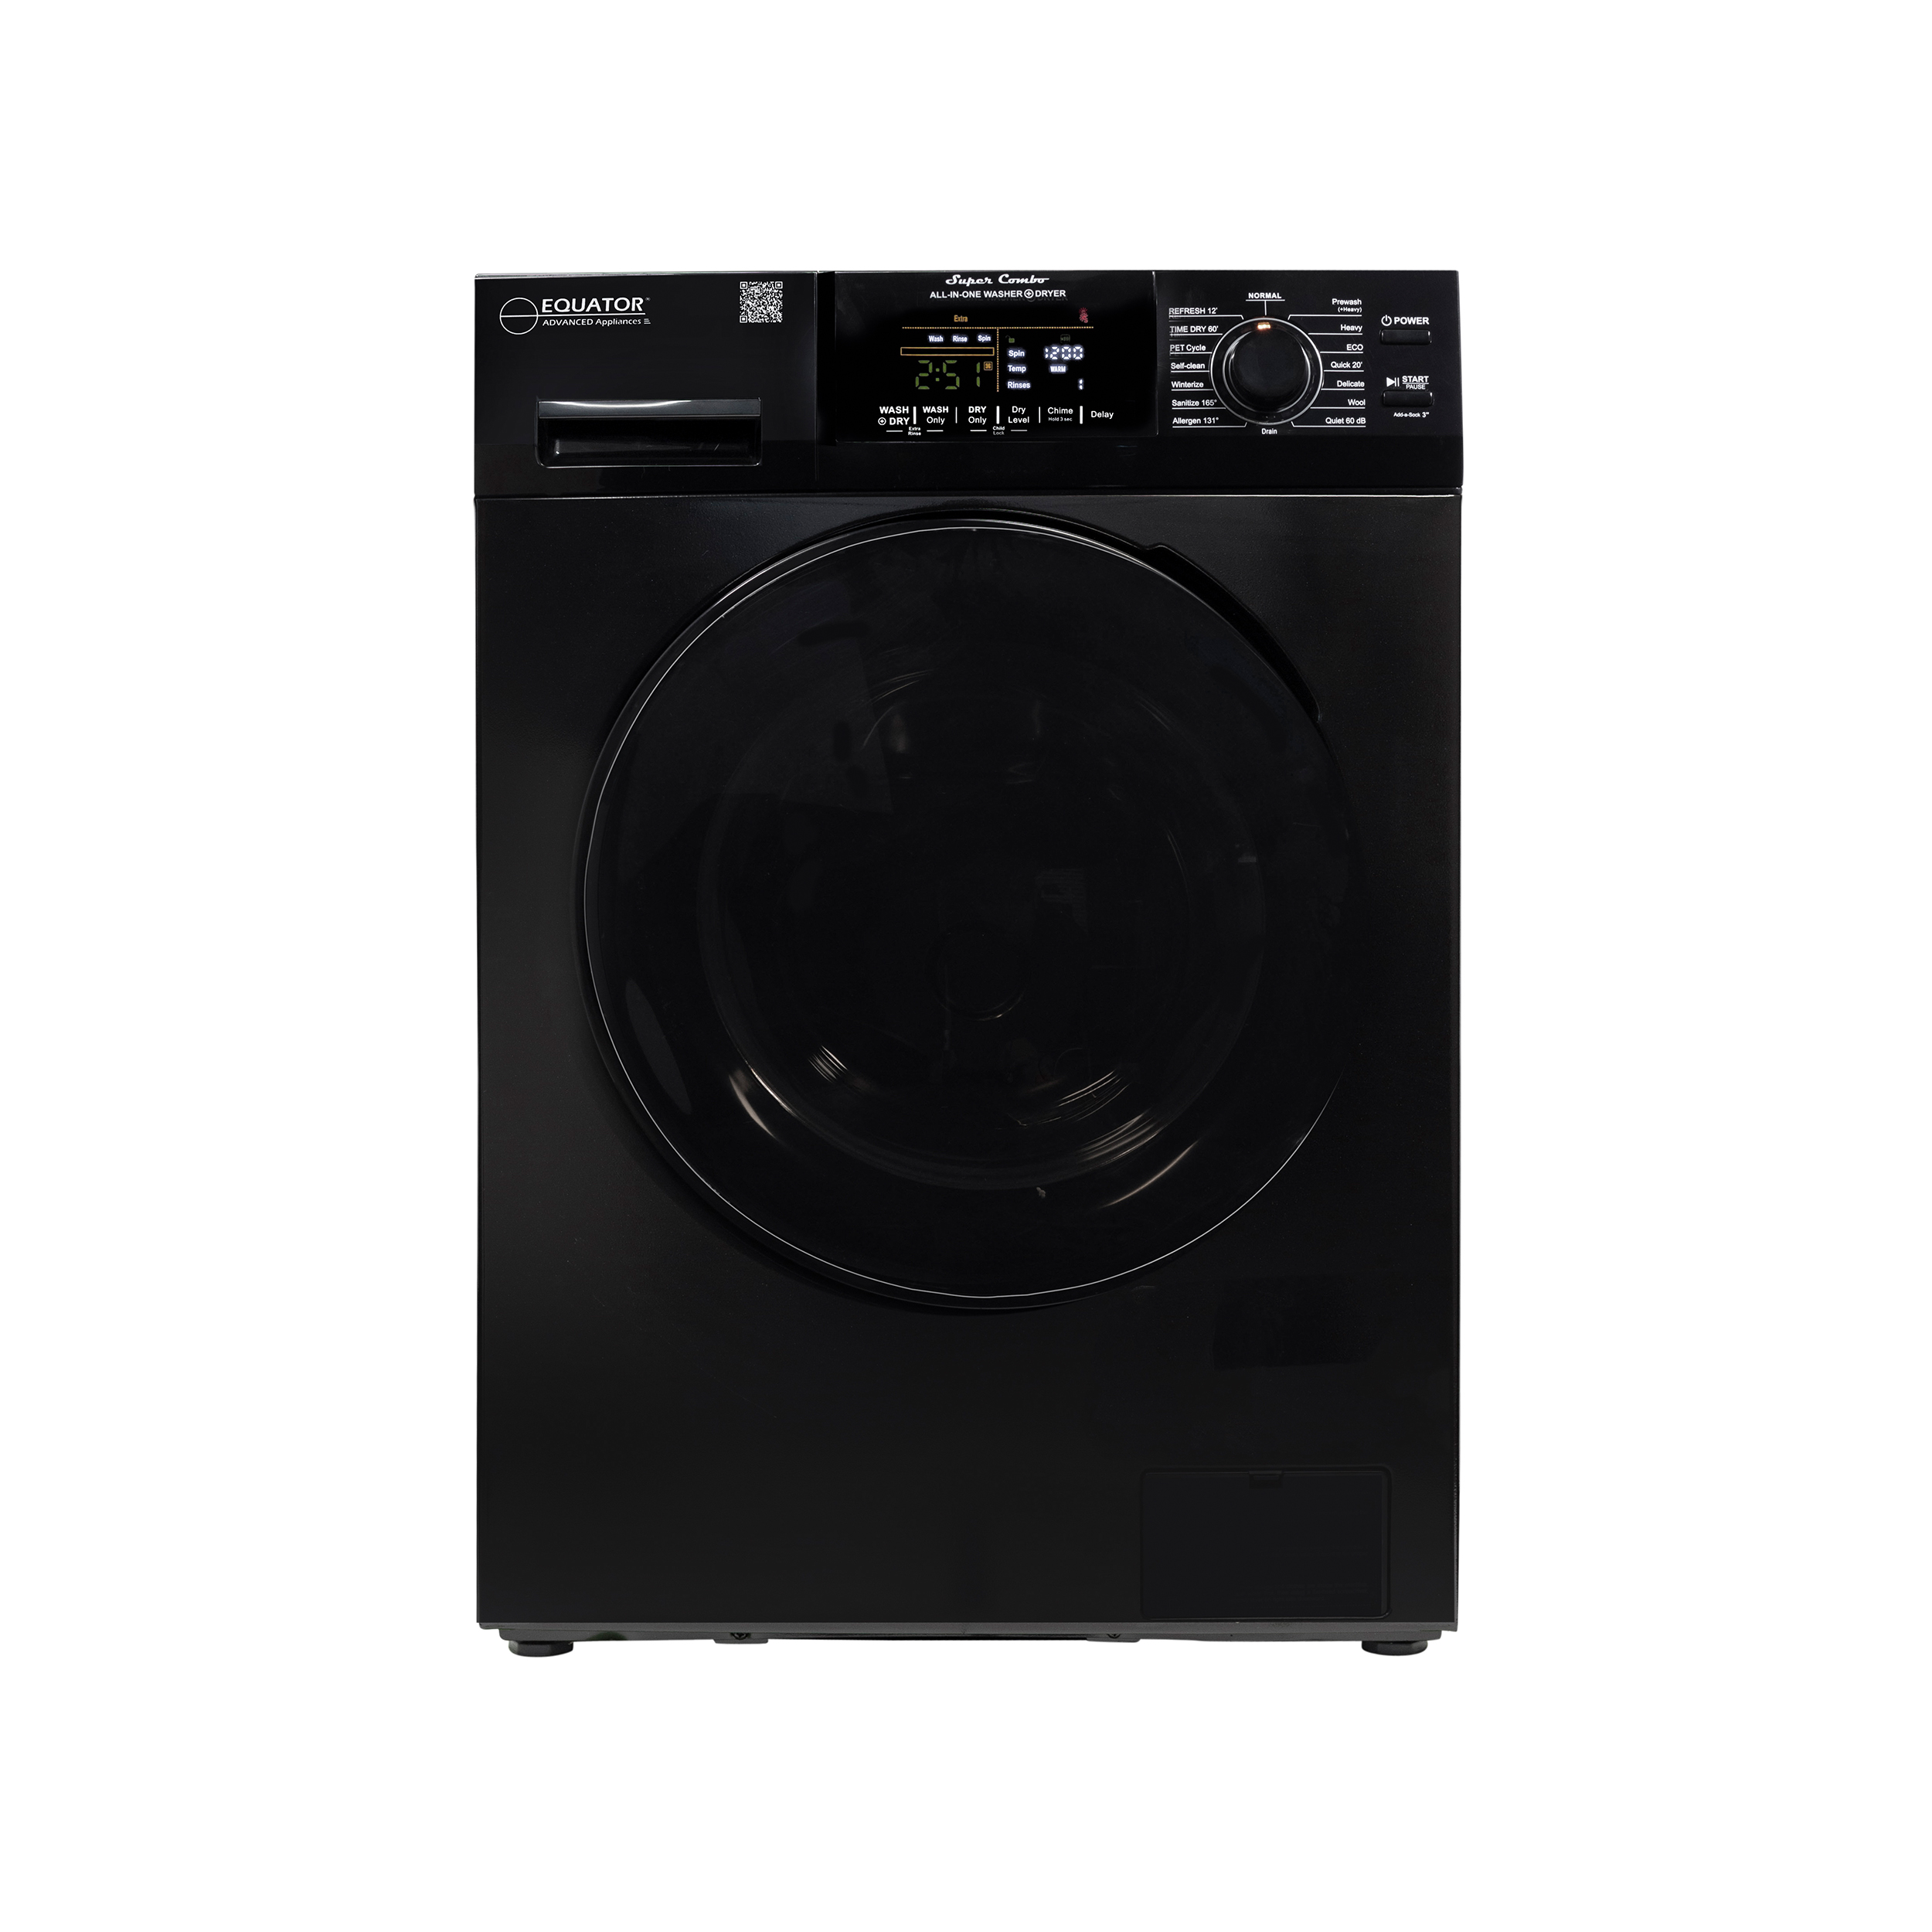 Equator Combo Washer Dryer VENTED-DRY 30% Faster than Condense 110V 15lb 1400RPM in Black